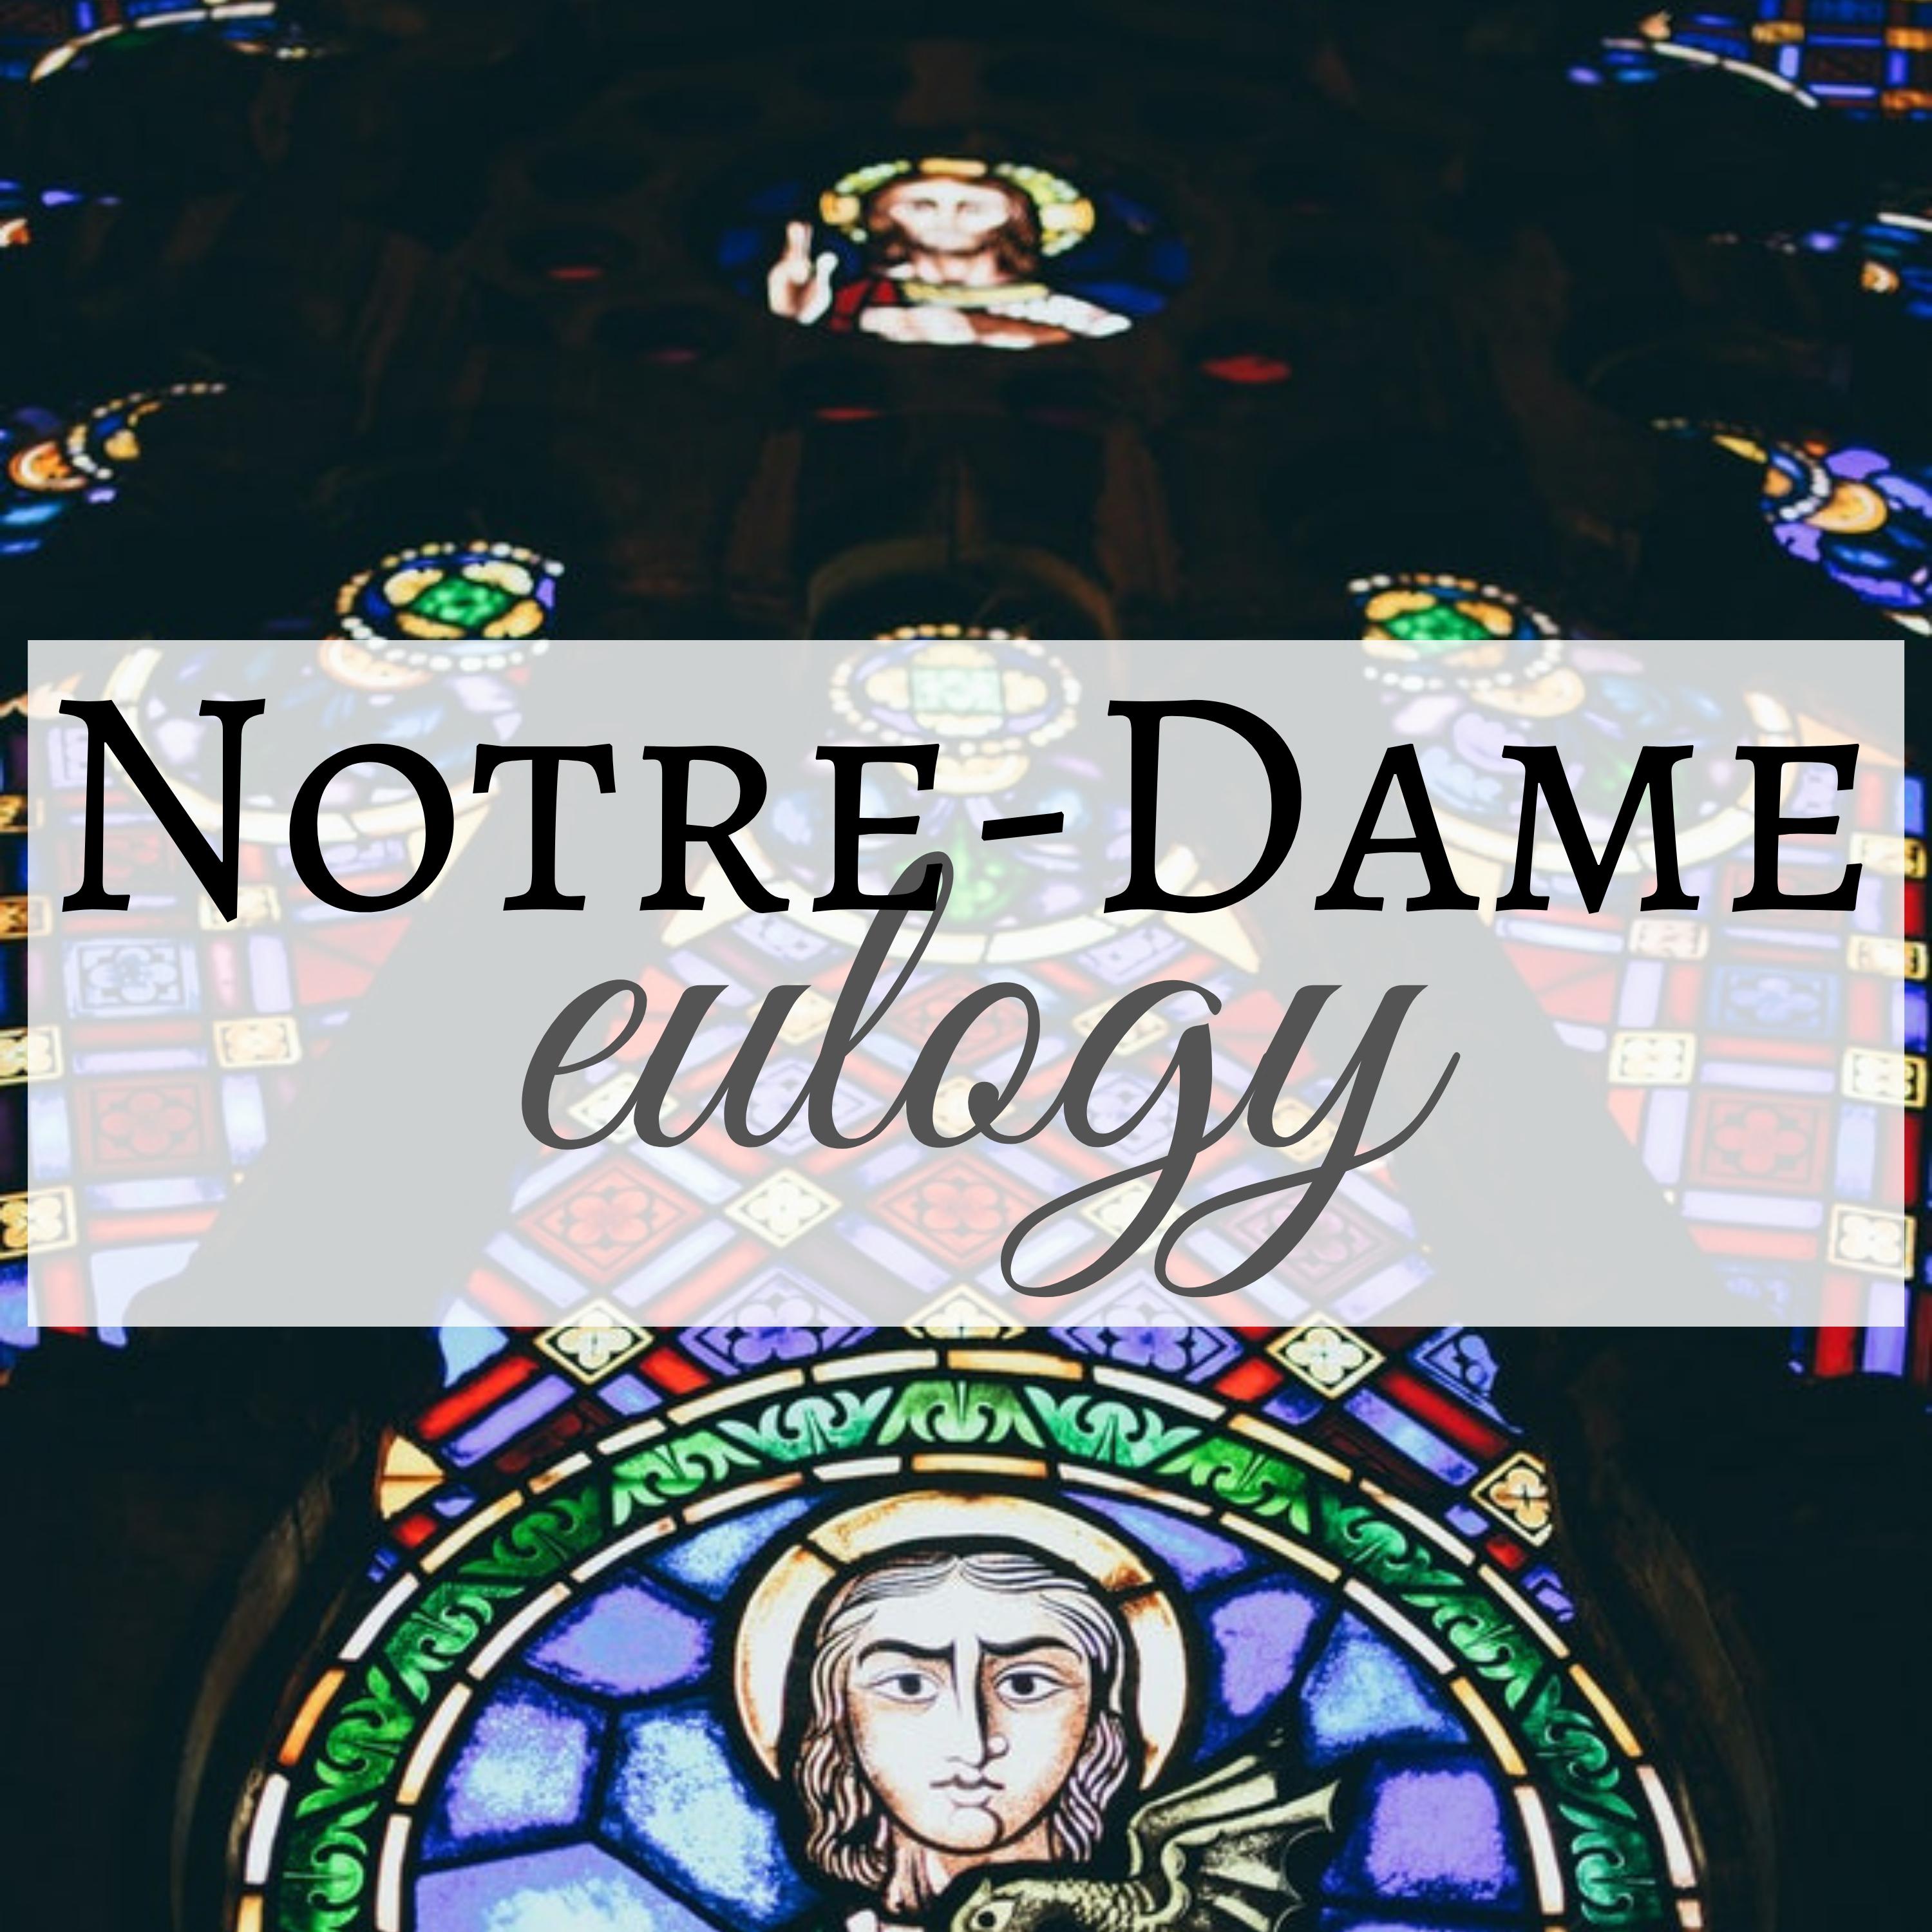 Notre-Dame Eulogy - Sad French Piano Music for Cathedrals, Emotional Songs for Grieving